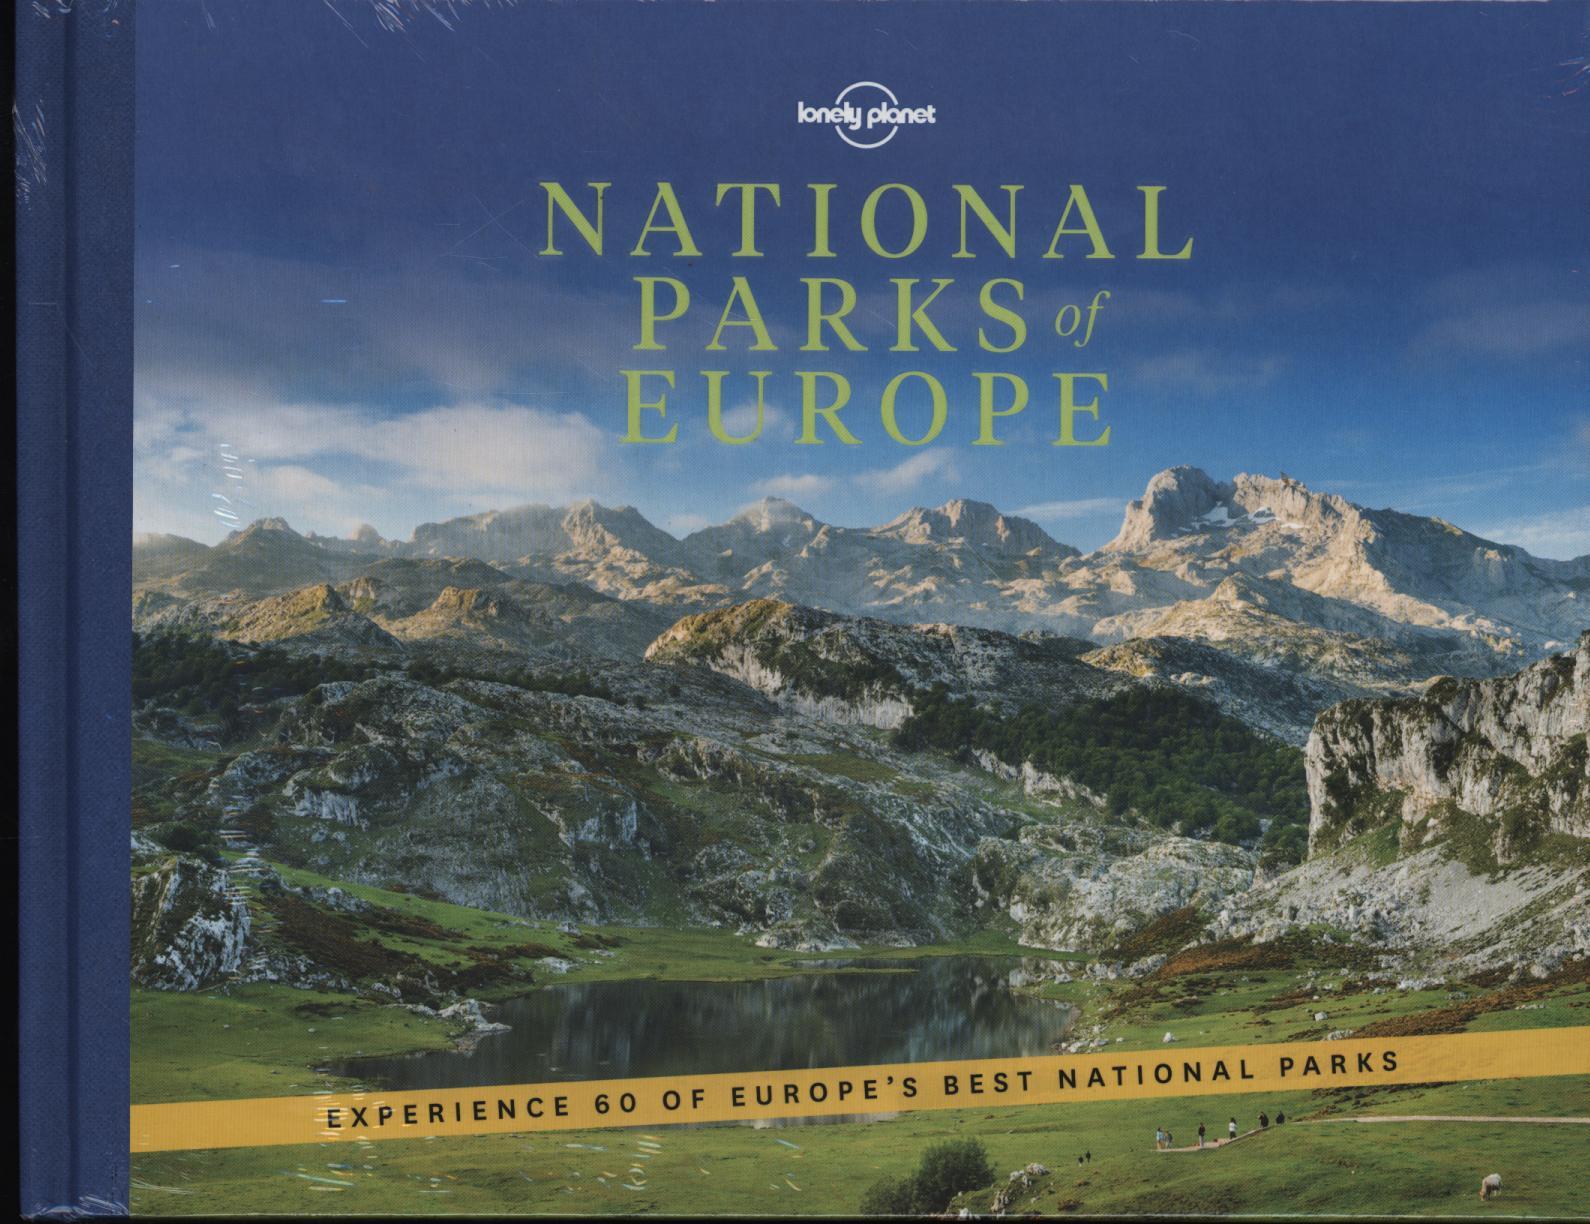 National Parks of Europe